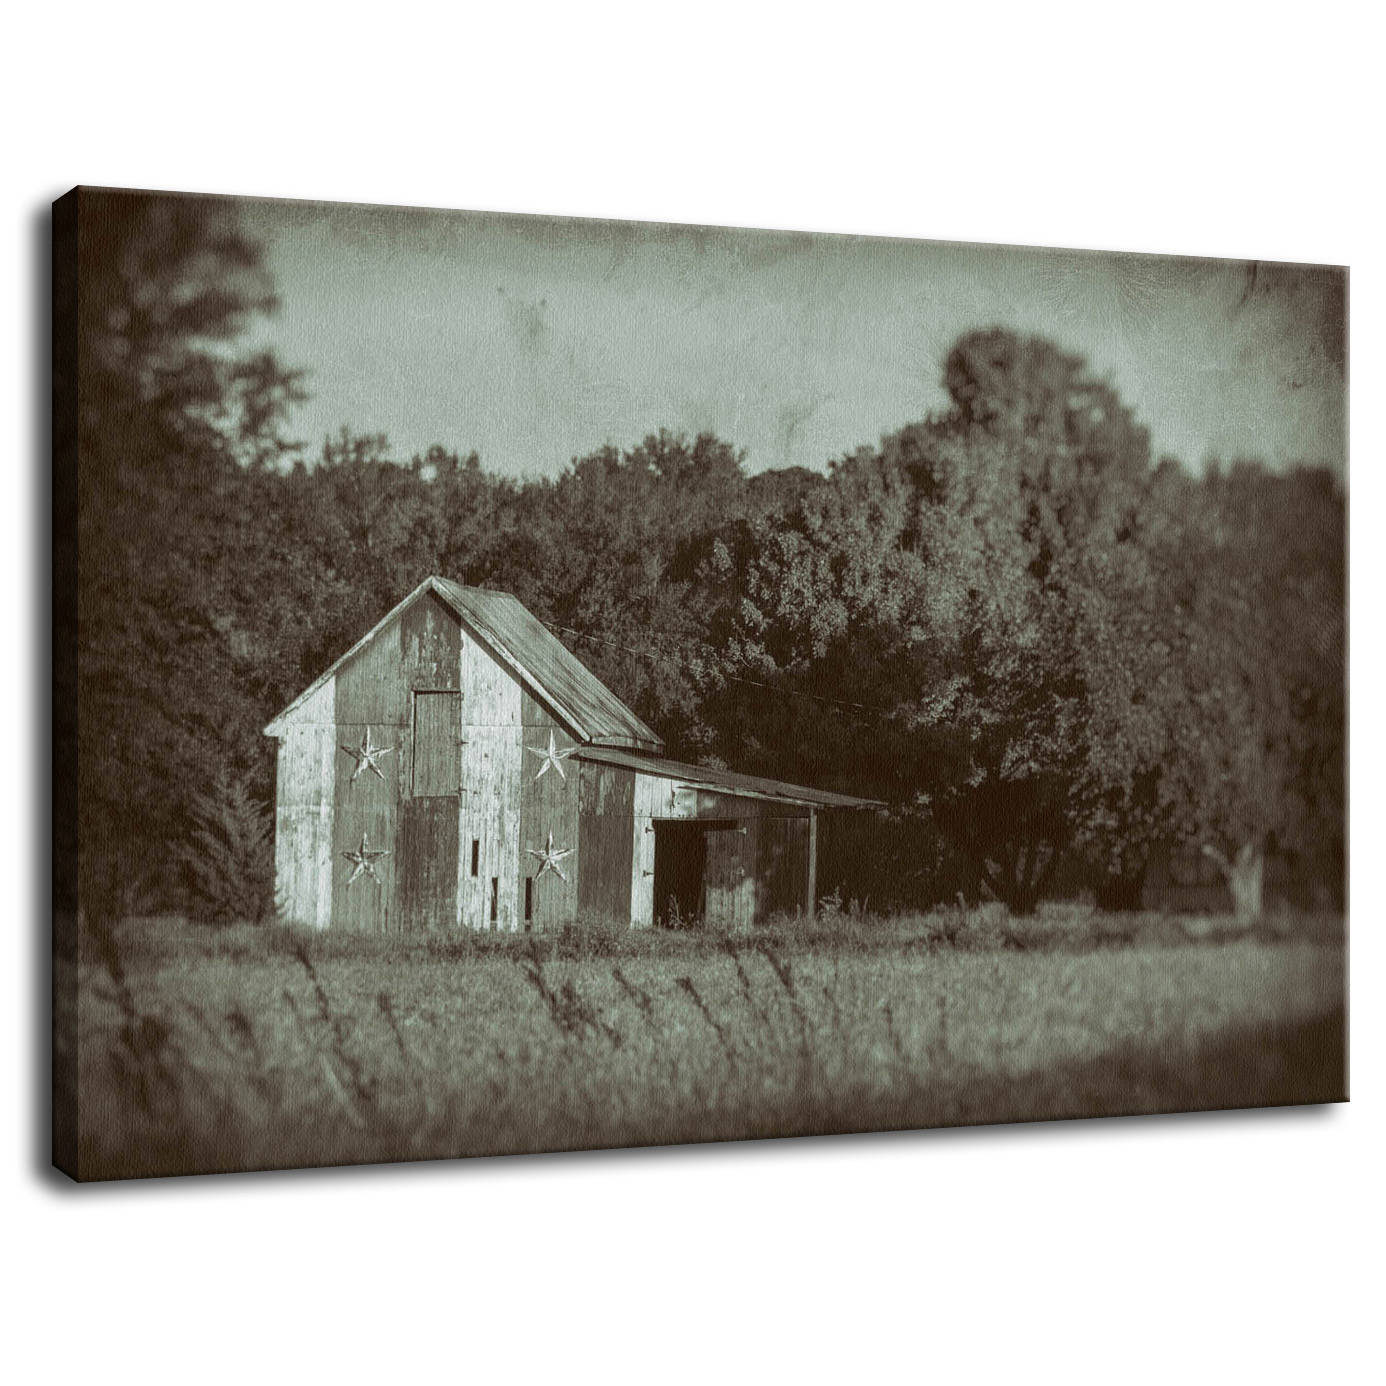 Patriotic Barn in Field Vintage Black and White Glass Plate Fine Art Canvas Wall Art Prints  - PIPAFINEART